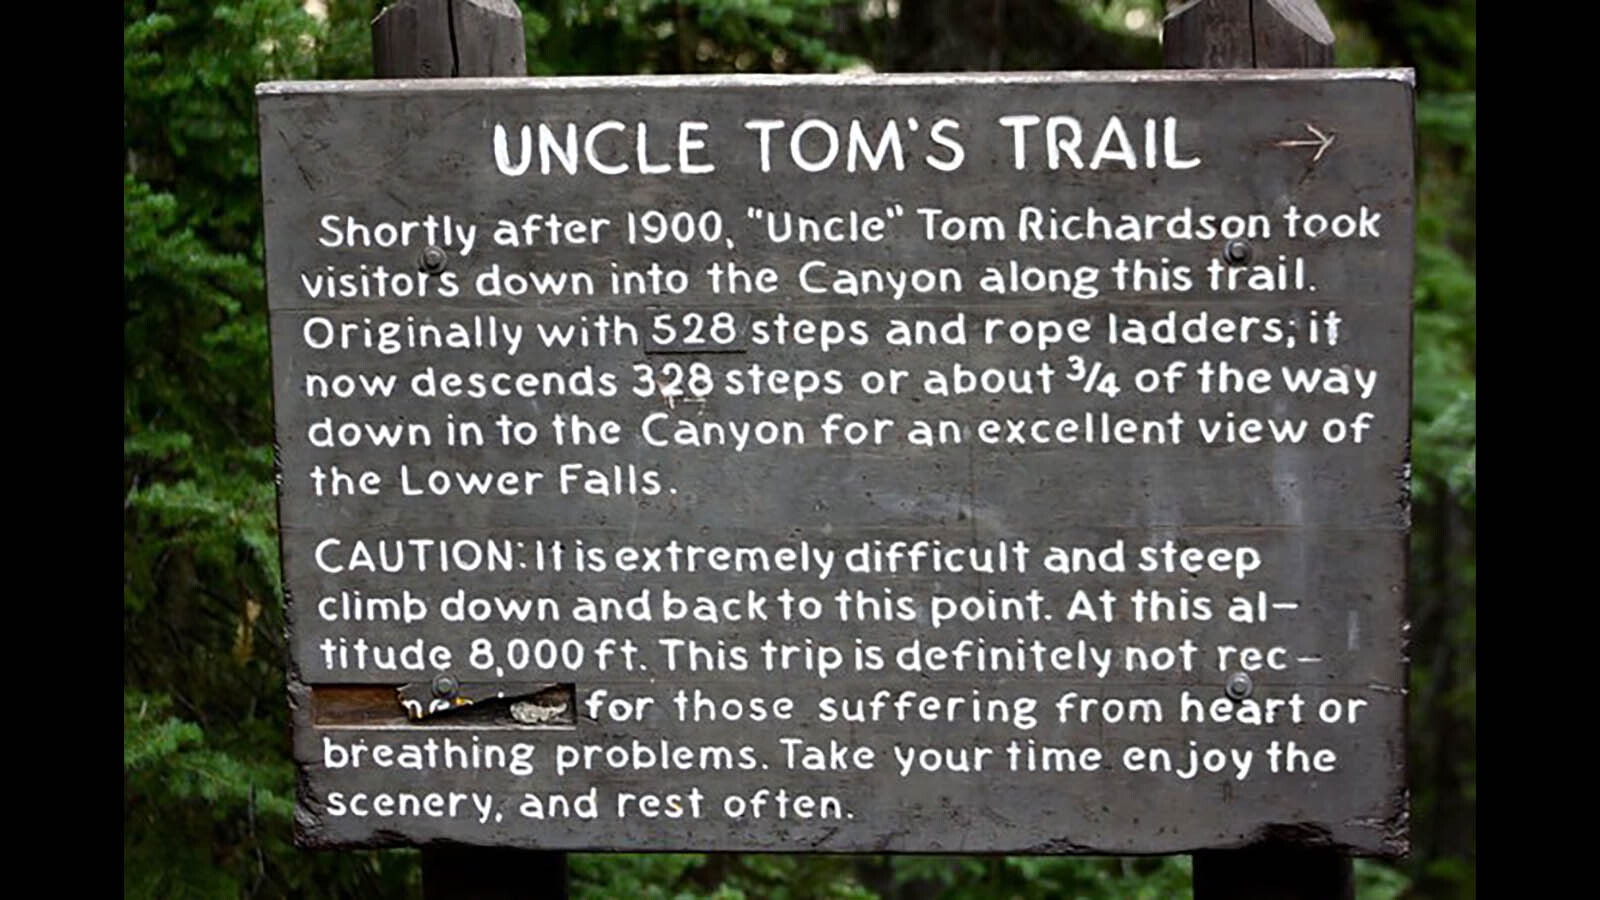 A sign tells Yellowstone visitors the story behind Uncle Tom's Trail.